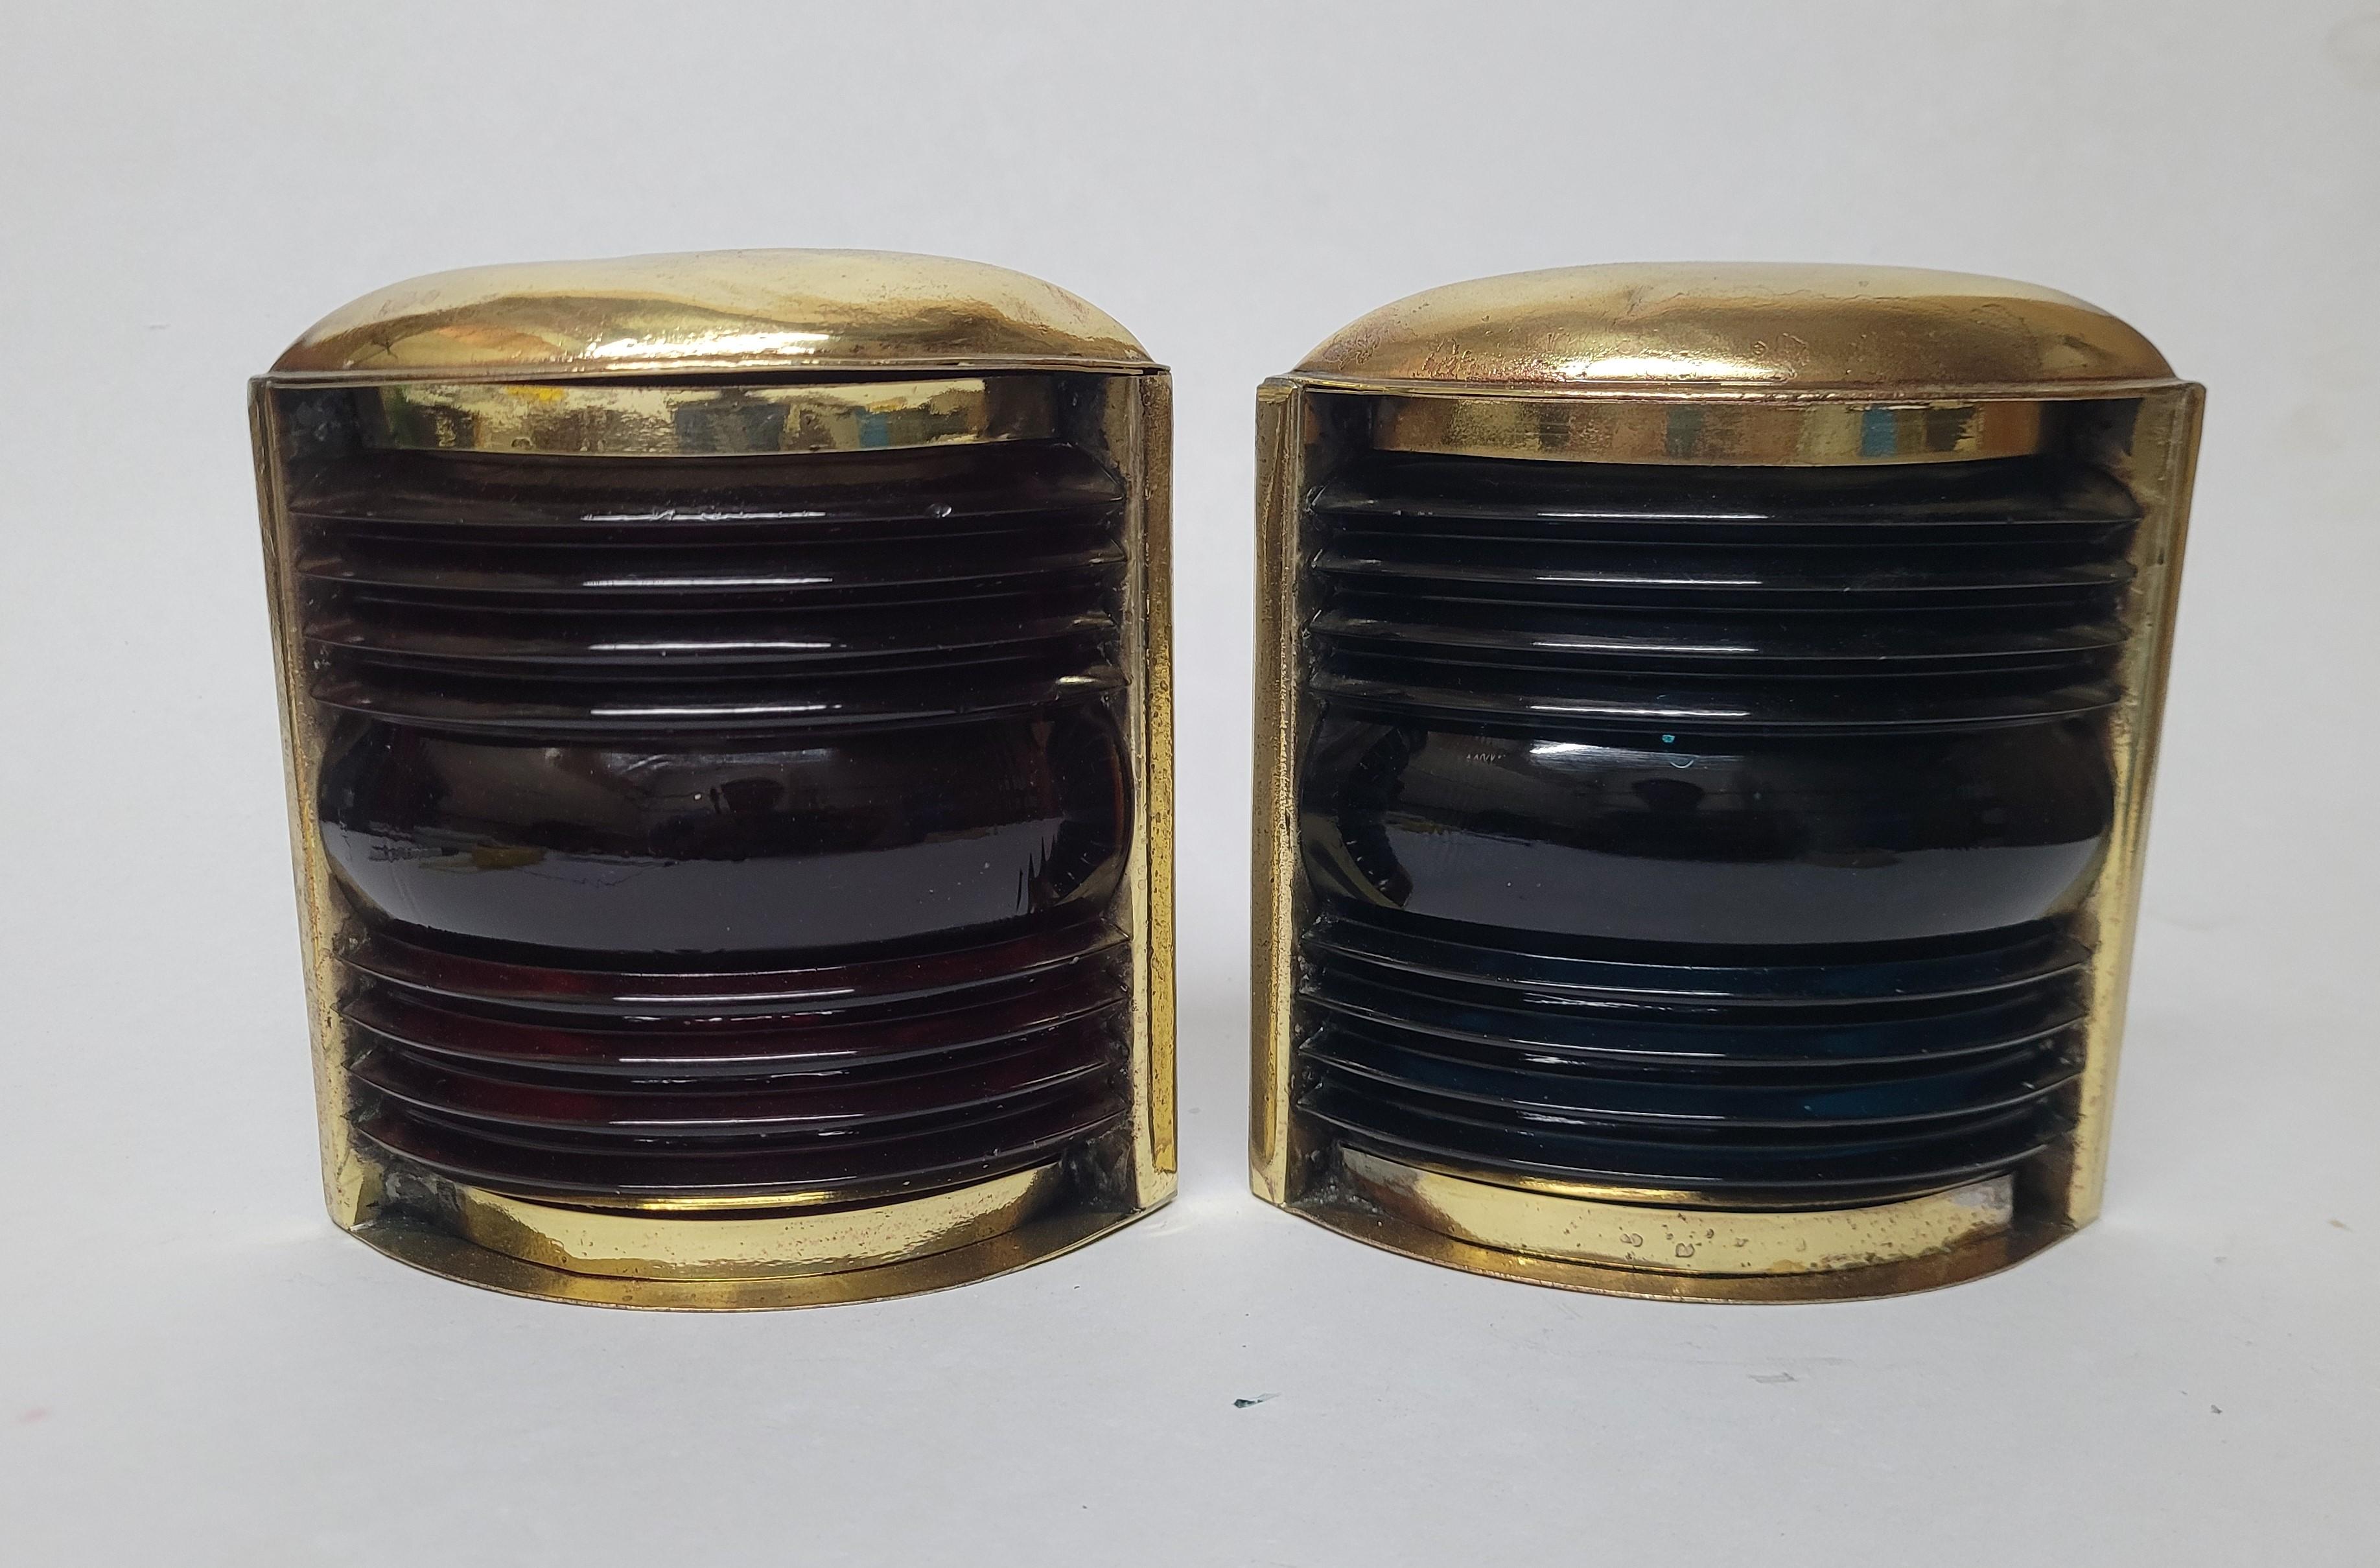 Highly polished solid brass boat lanterns with fresnel glass lenses. Rich blue and red in color. Circa 1950

Weight: 2 lbs
Overall Dimensions: 6